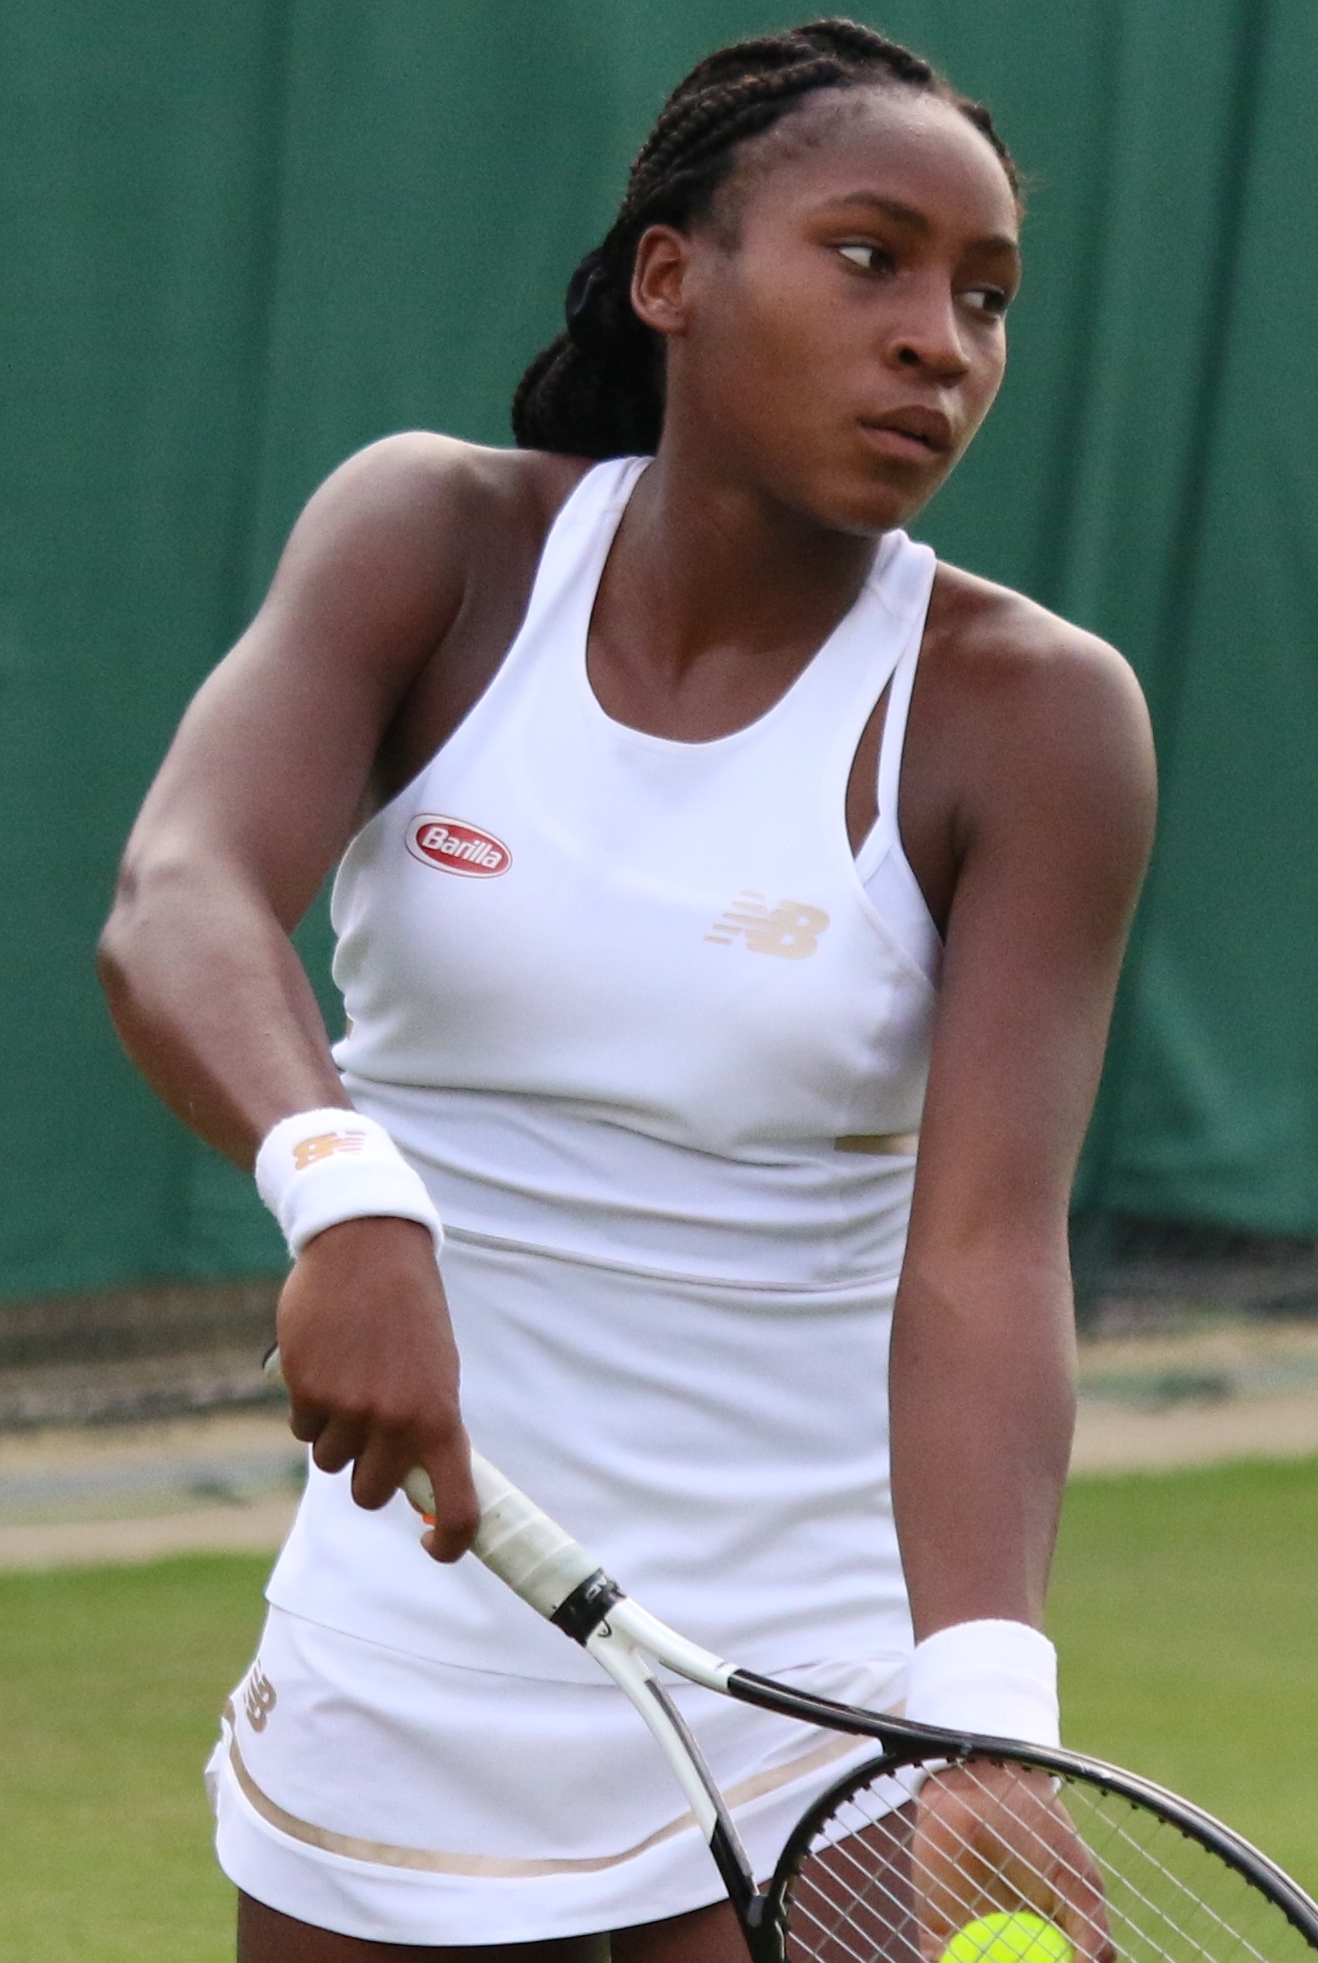 Coco Gauff: The future of tennis and sports stars